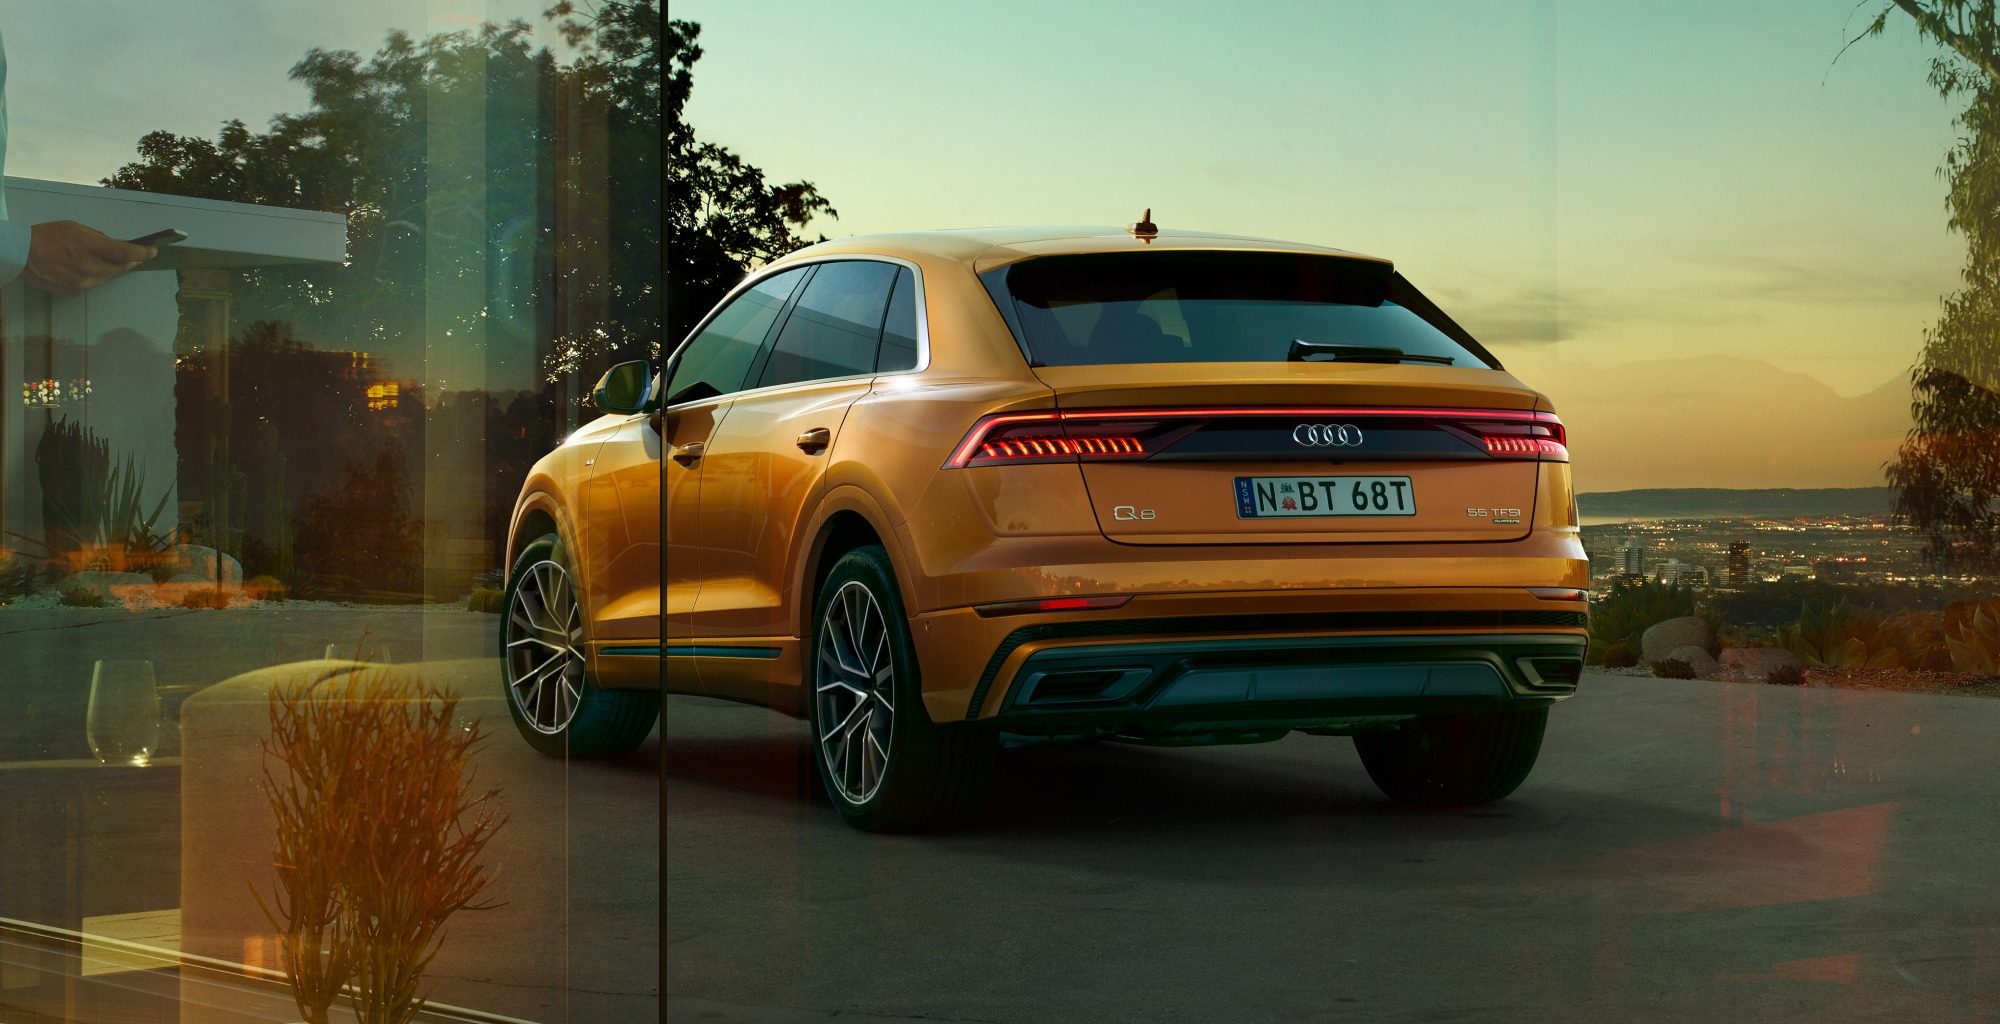 Orange Audi Q8 parked in a driveway at nighttime